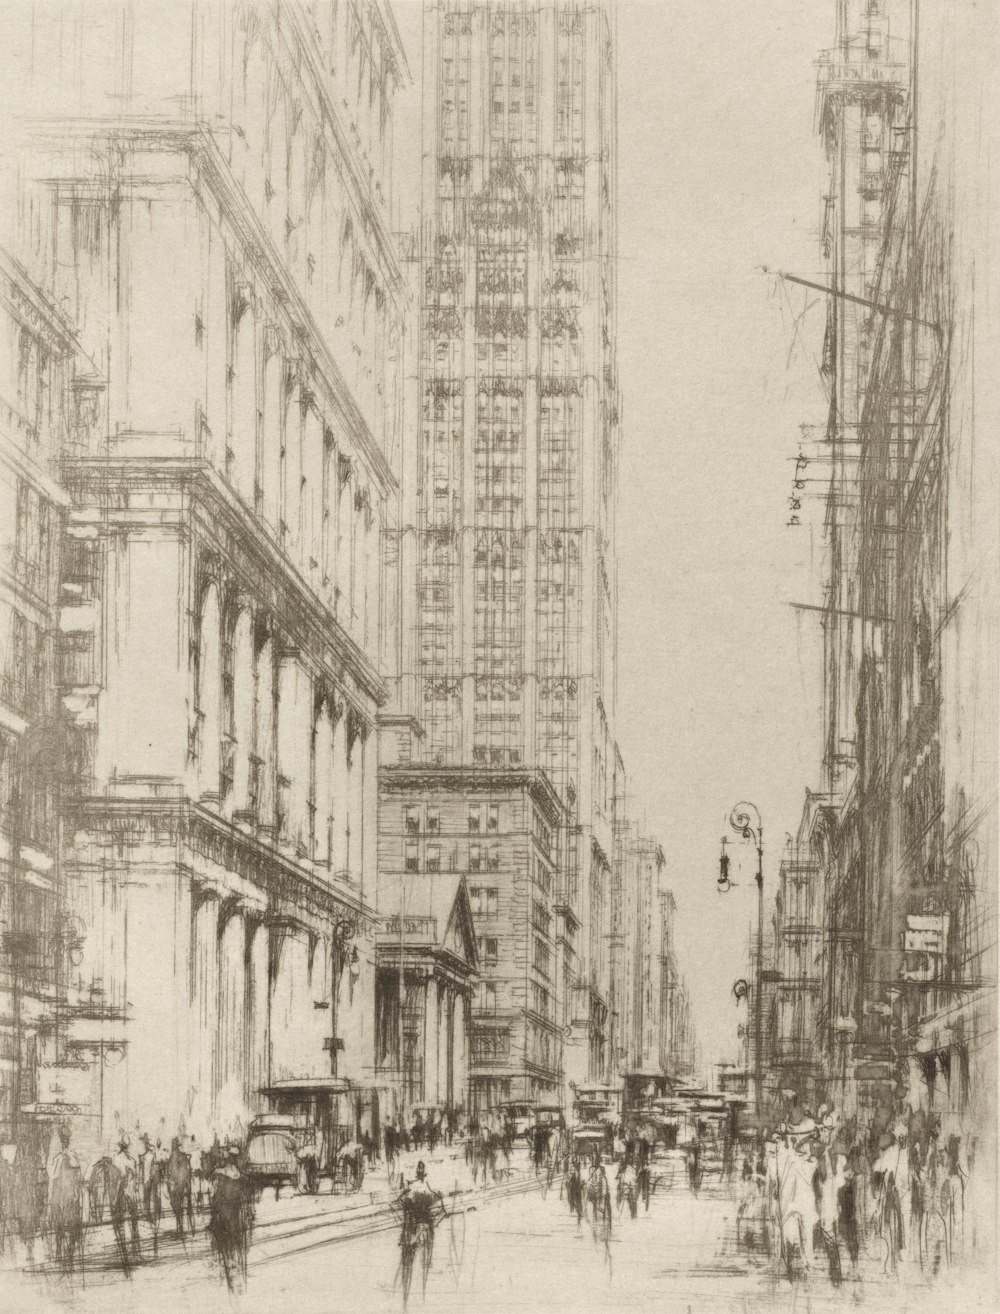 a drawing of a city street filled with people